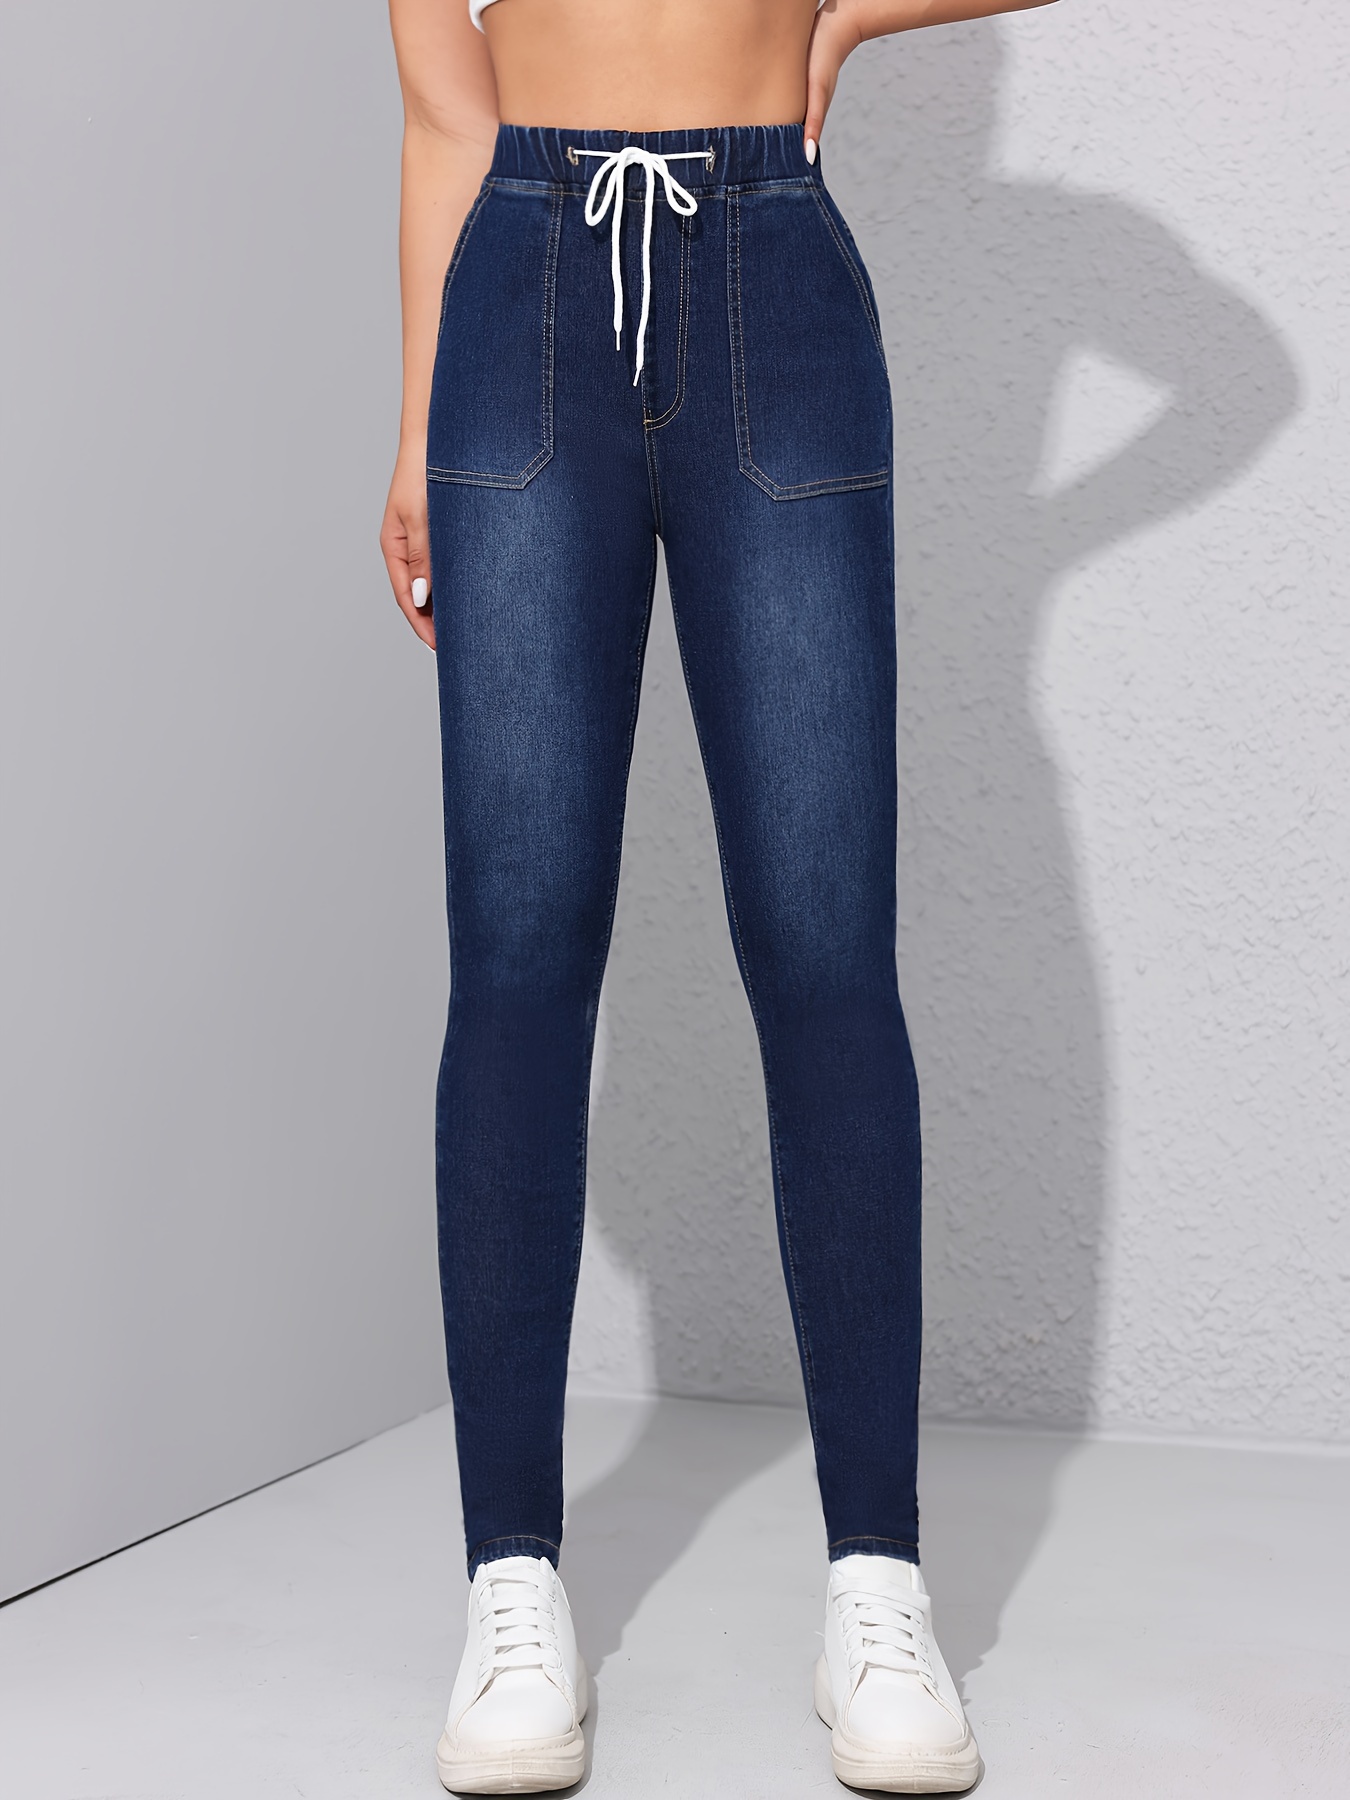 High Waisted Blue And Black Denim Ankle Jeans Women For Women Elastic,  Thin, And Skinny Pencil Pants From Luote, $15.37